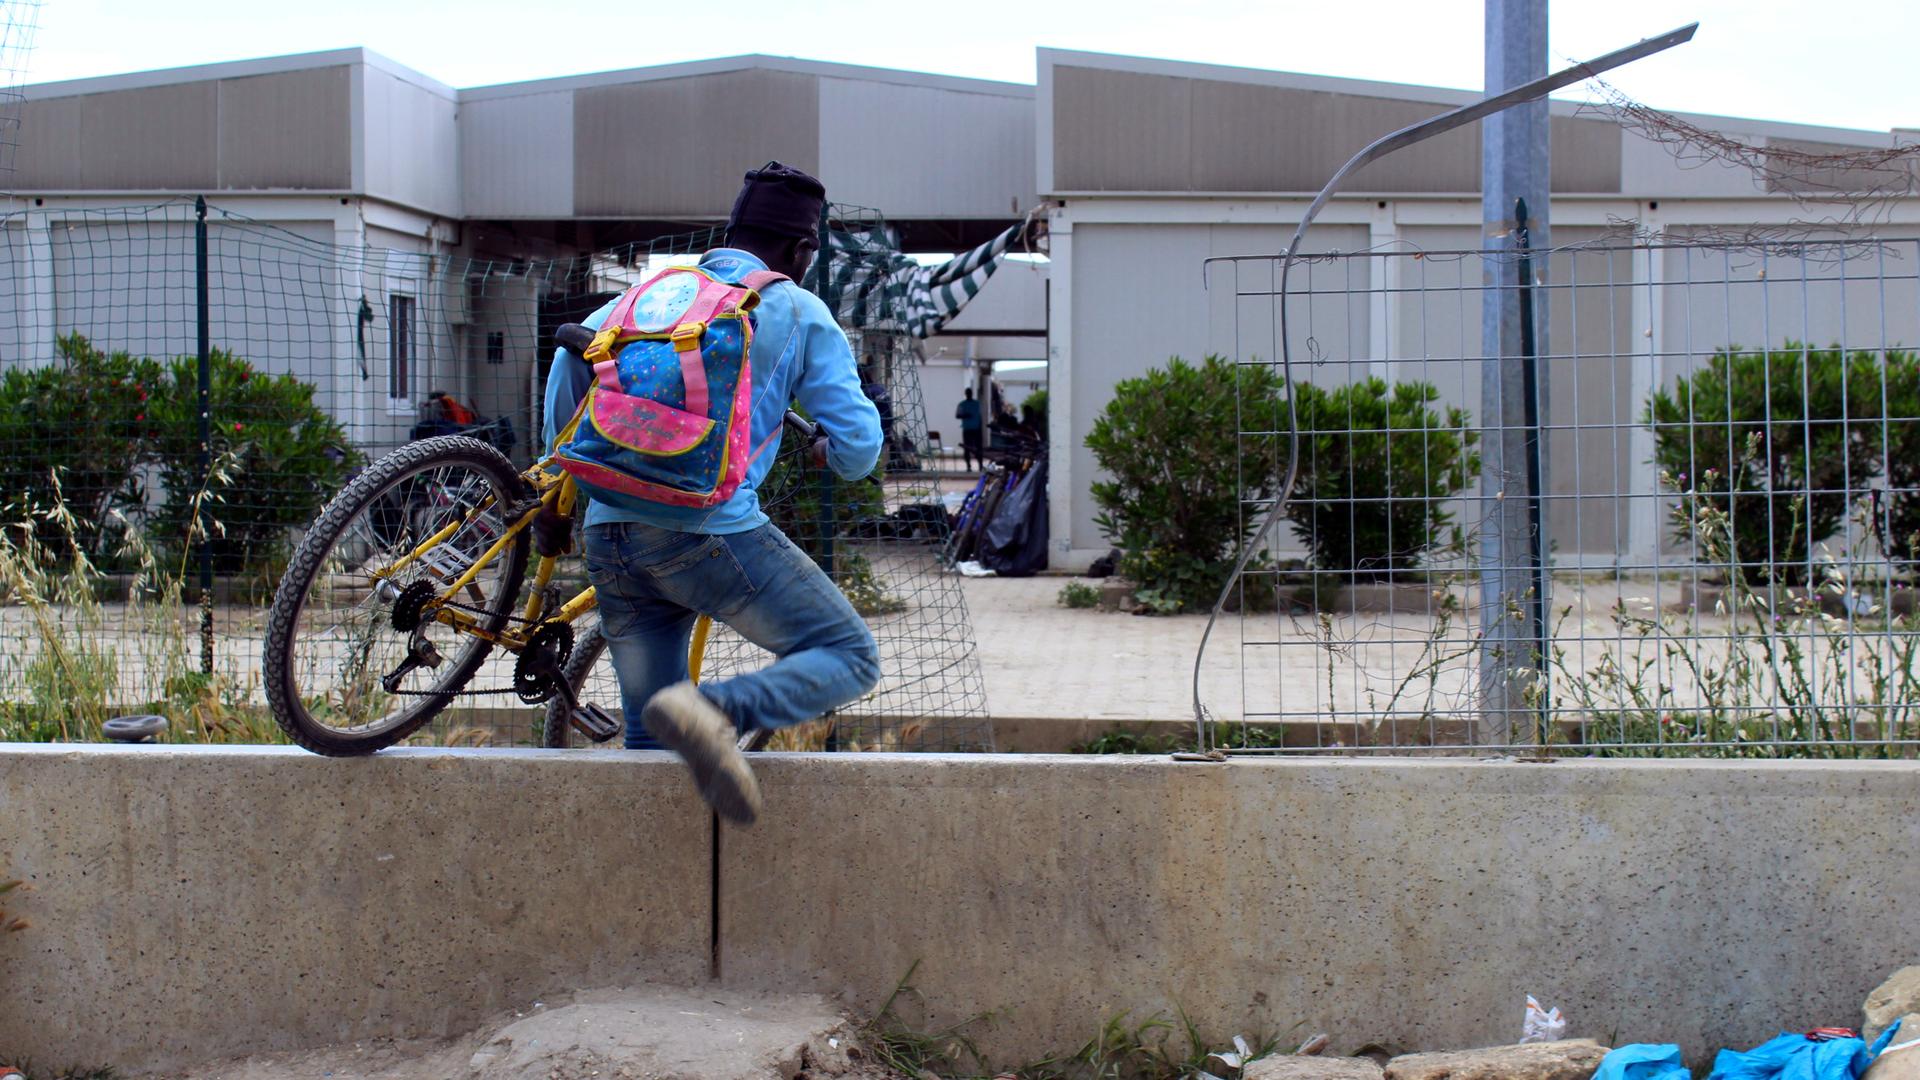 Young man crawls through fence with bicycle 